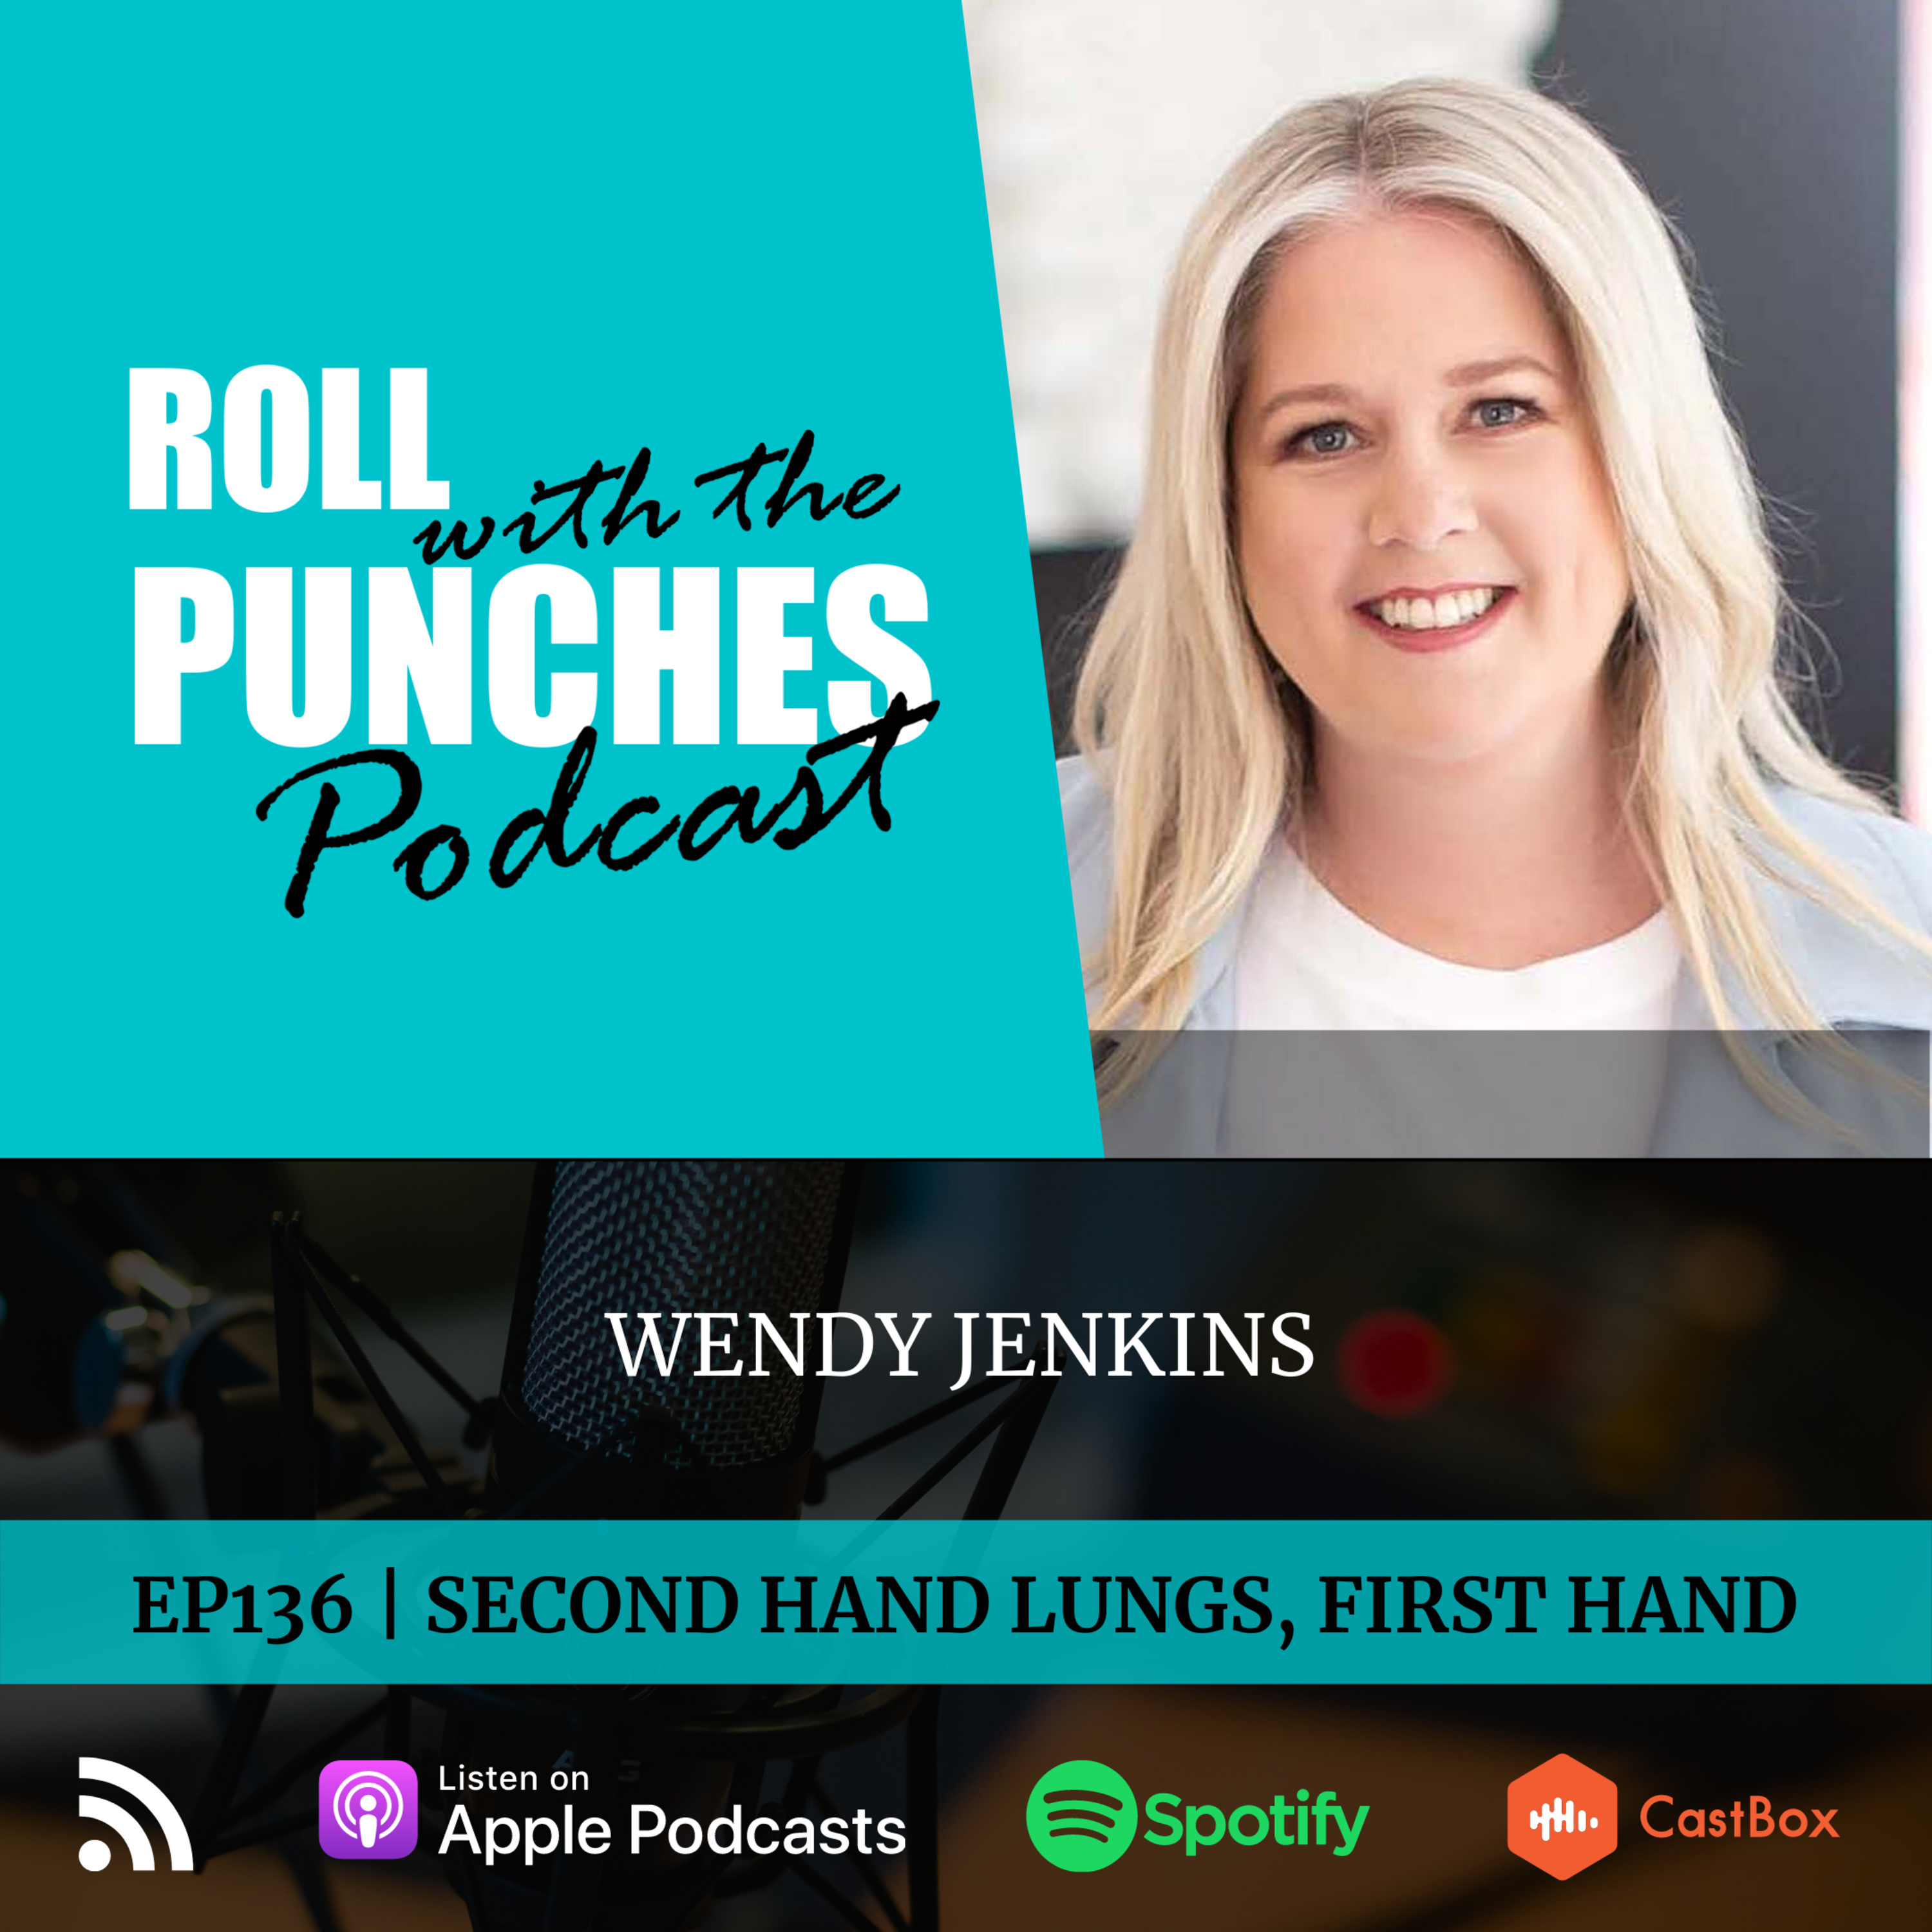 EP136 Second Hand Lungs, First Hand | Wendy Jenkins